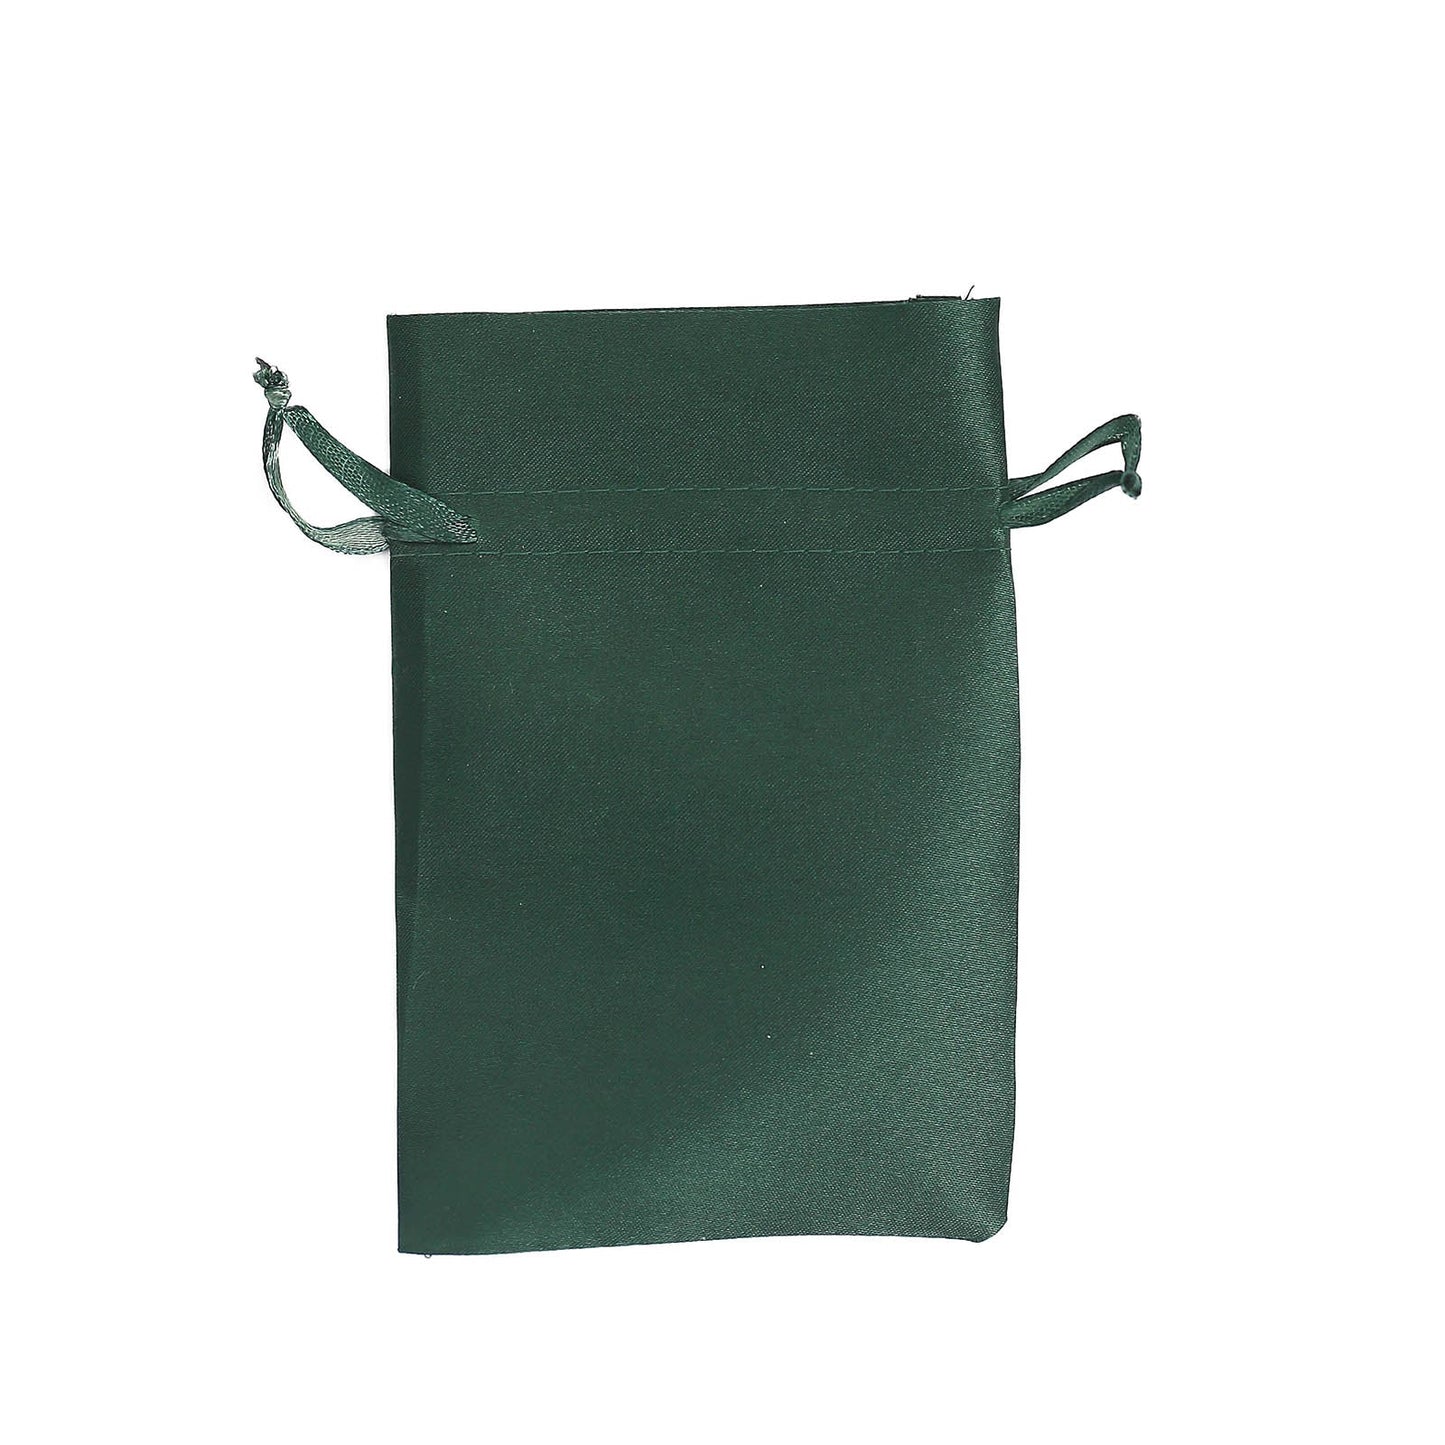 12 Pack 4"x6" Hunter Emerald Green Satin Wedding Party Favor Bags, Drawstring Pouch Gift Bags